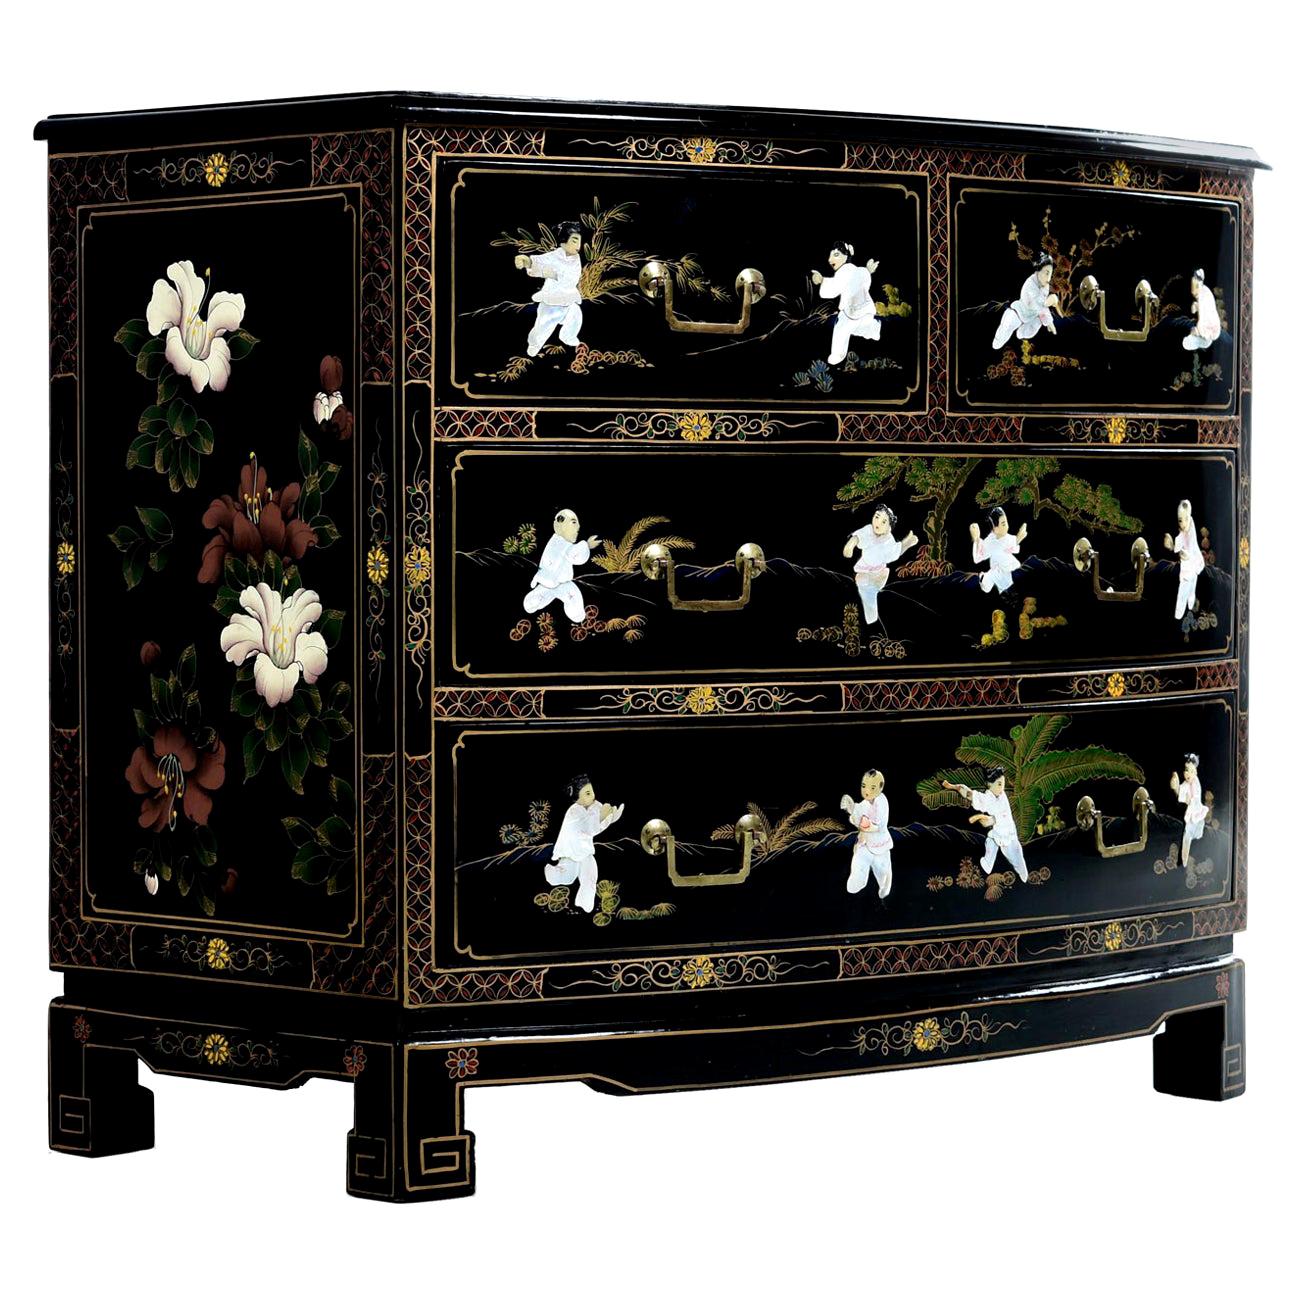 Black Lacquer Hand Painted Chinoiserie Dresser with Mother of Pearl Figures